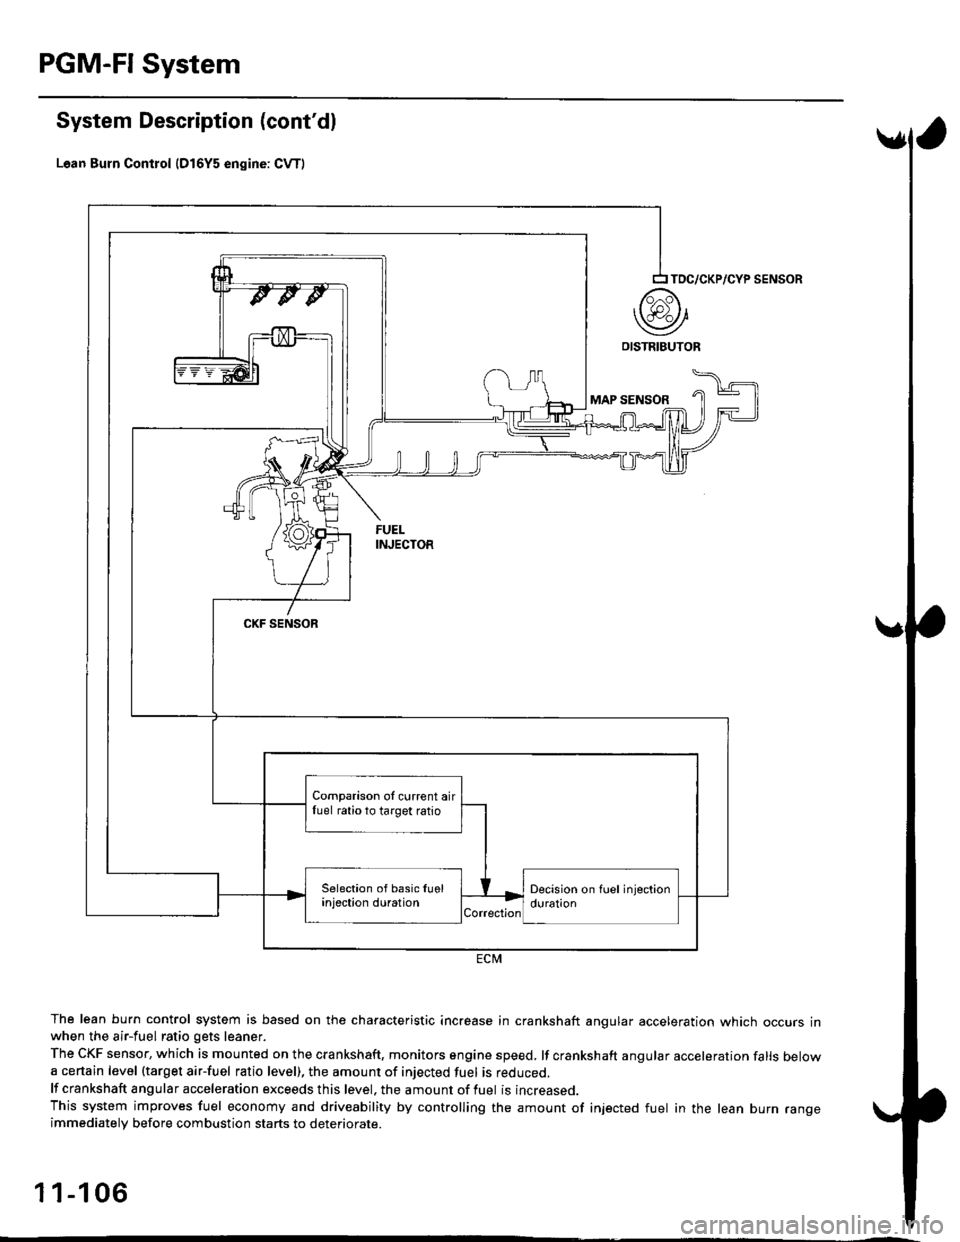 HONDA CIVIC 1998 6.G Workshop Manual PGM-FI System
System Description (contdl
Lean Burn Control {D16Y5 engine: CvT)
The lean burn control system is based on the characteristic increase in crankshaft angular acceleration which occurs inw